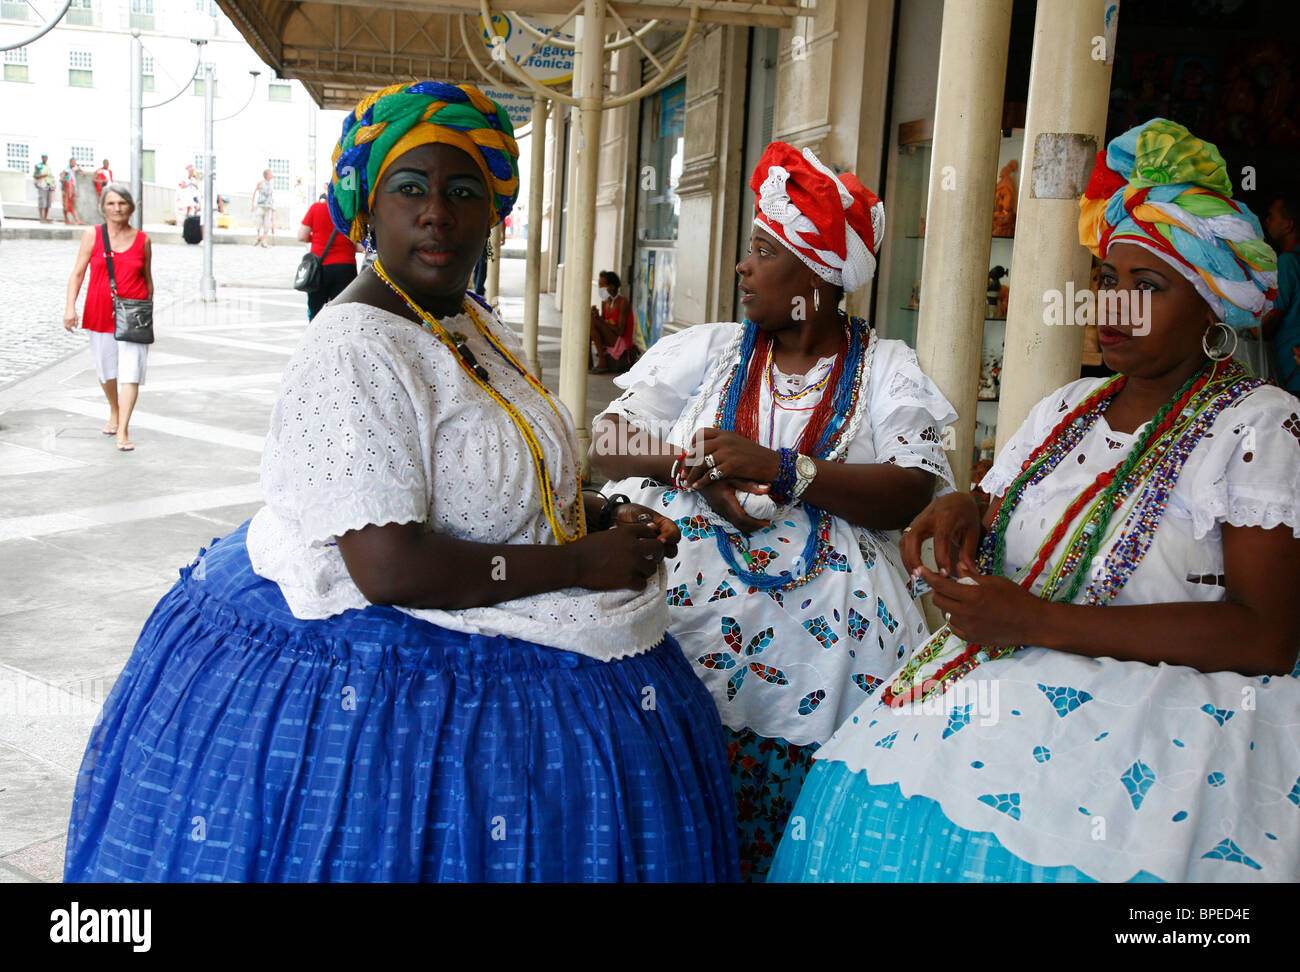 Women In Traditional Salvador Da Brazil, Stock Photo, Picture And ...